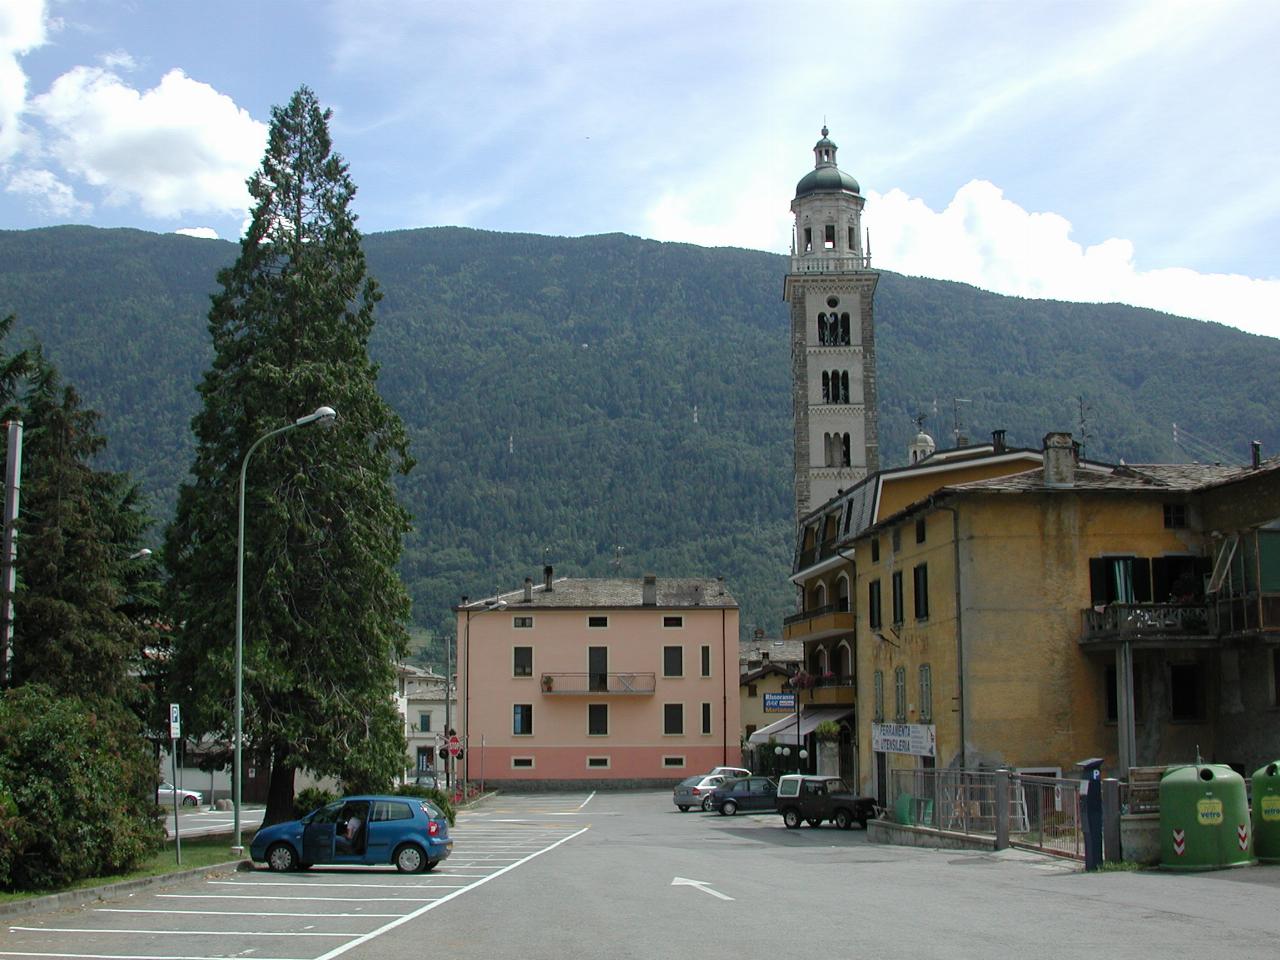 Tirano, in the mountains north of Monza/Milan